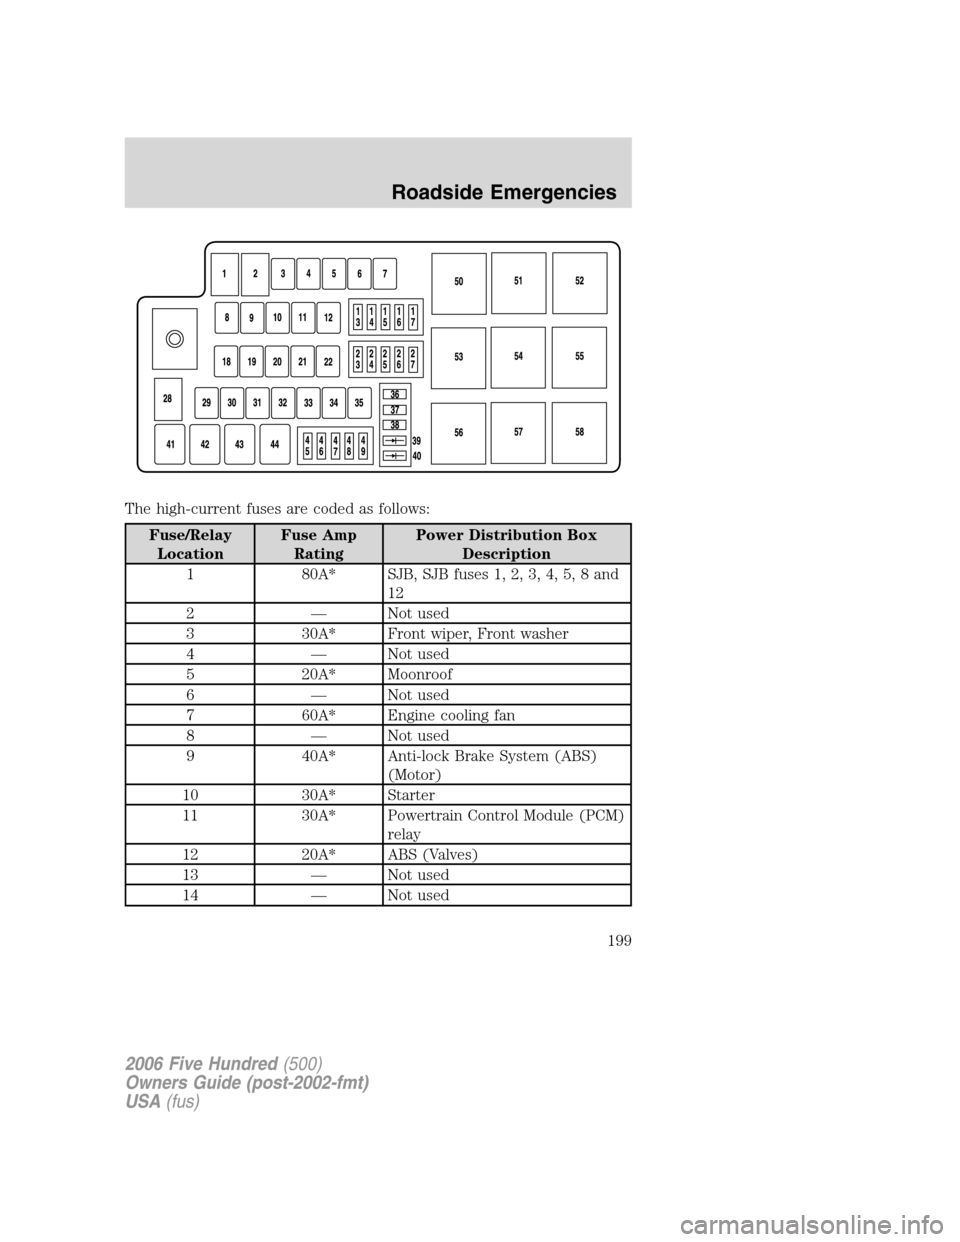 FORD FIVE HUNDRED 2006 D258 / 1.G Service Manual The high-current fuses are coded as follows:
Fuse/Relay
LocationFuse Amp
RatingPower Distribution Box
Description
1 80A* SJB, SJB fuses 1, 2, 3, 4, 5, 8 and
12
2 — Not used
3 30A* Front wiper, Front